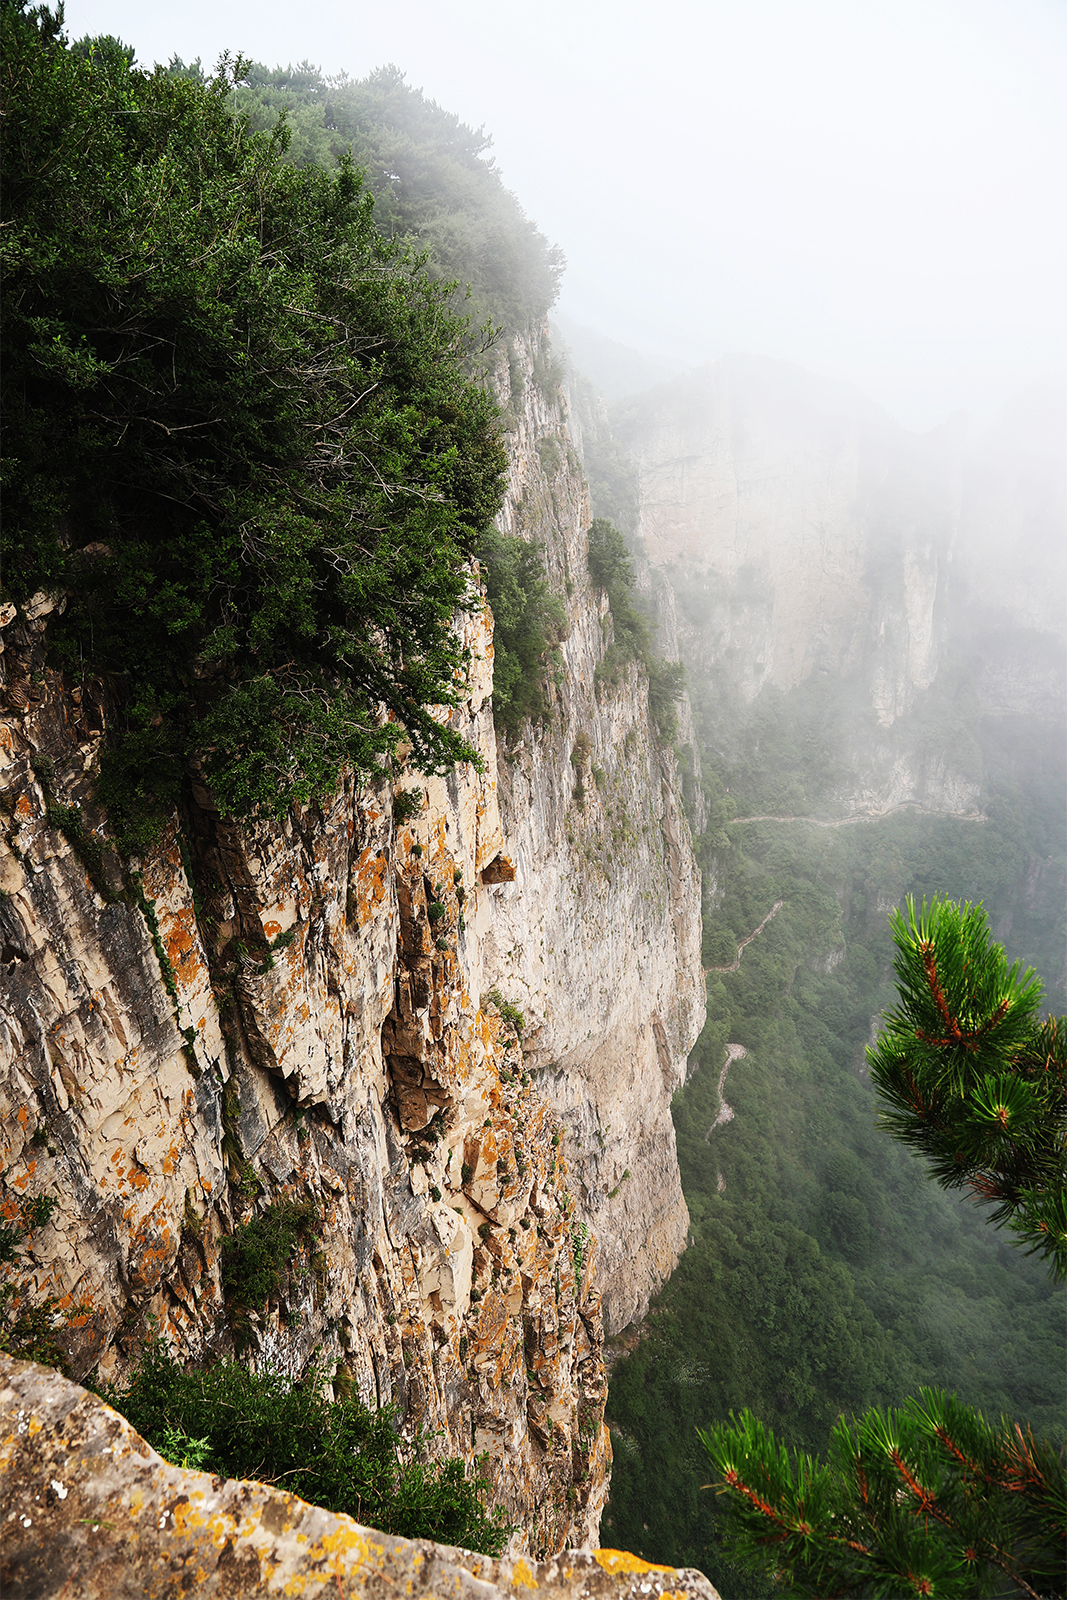 Wang Mang Ridge in the Taihang Mountains is famed for its precipitous cliffs. /CGTN